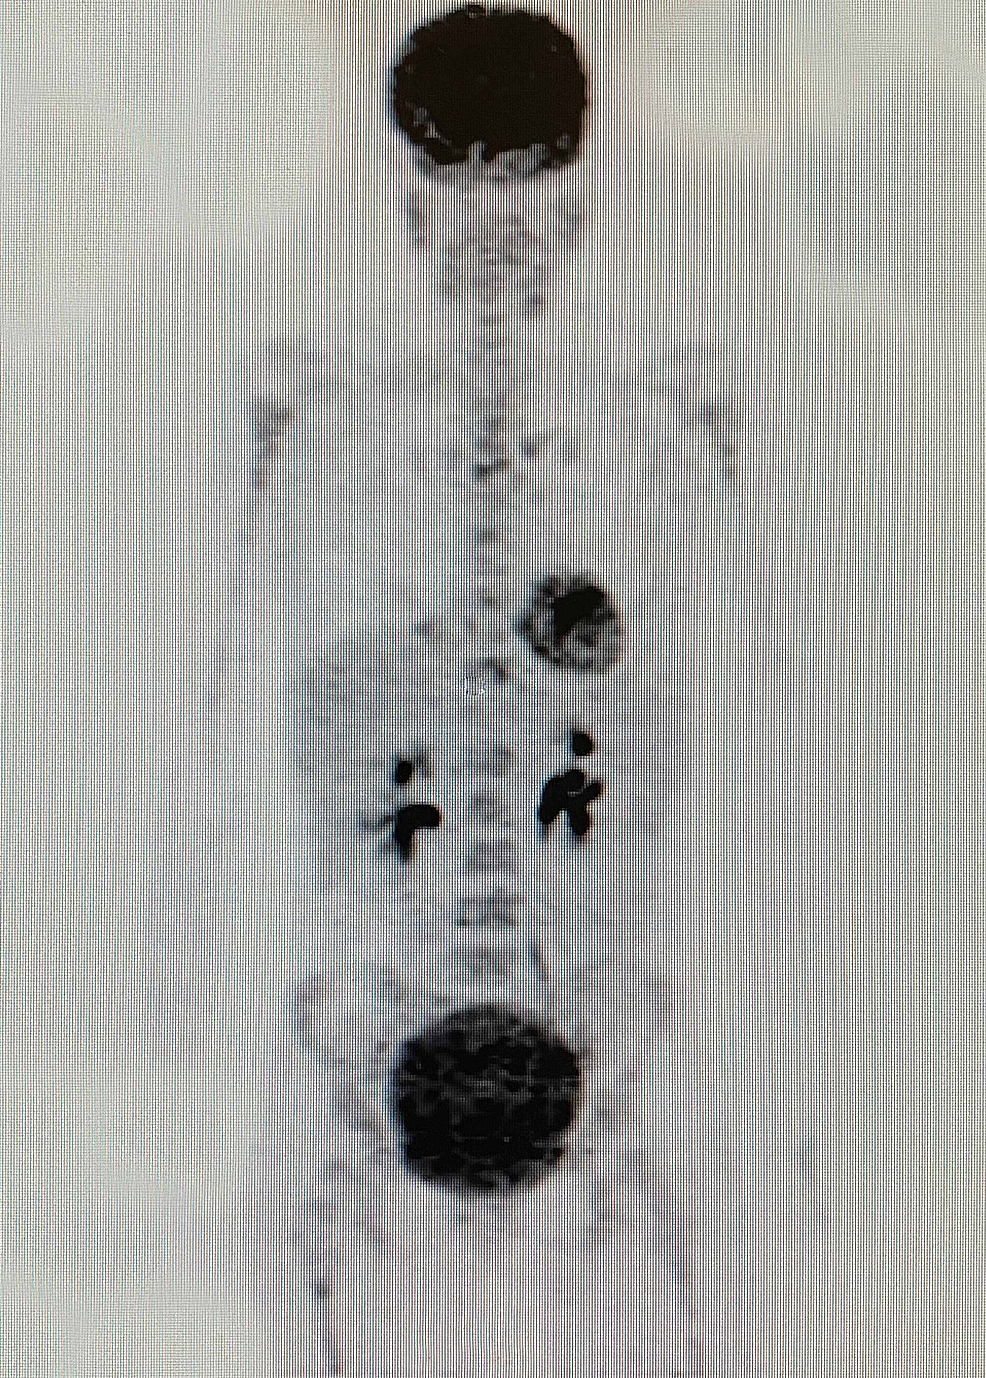 Whole-body-(18F)-FDG-PET-CT-scan-done-on-April-25,-2019-after-nine-cycles-of-MSCT,-KD,-HT,-and-HBOT-treatment-showing-no-pathological-FDG-uptake,-indicative-of-a-complete-response